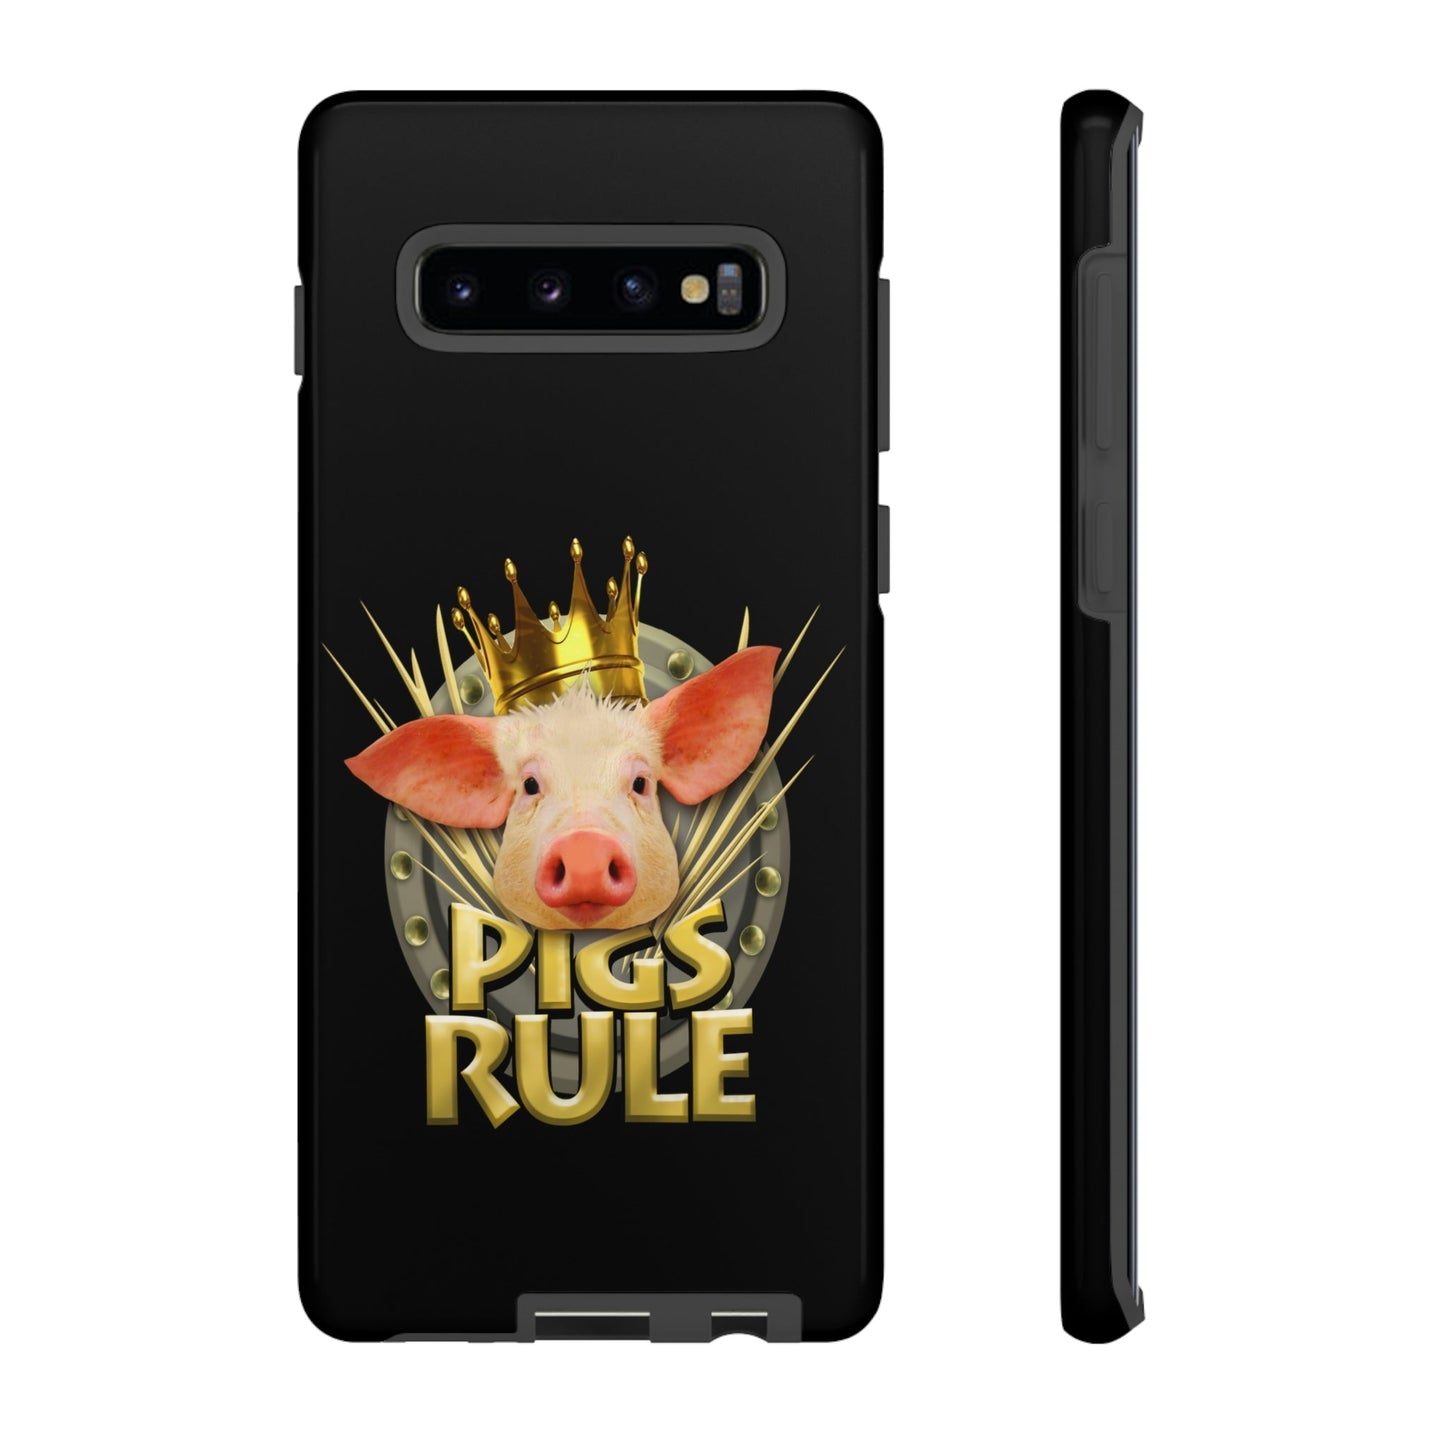 Pigs Rule Tough Cases for most phone models